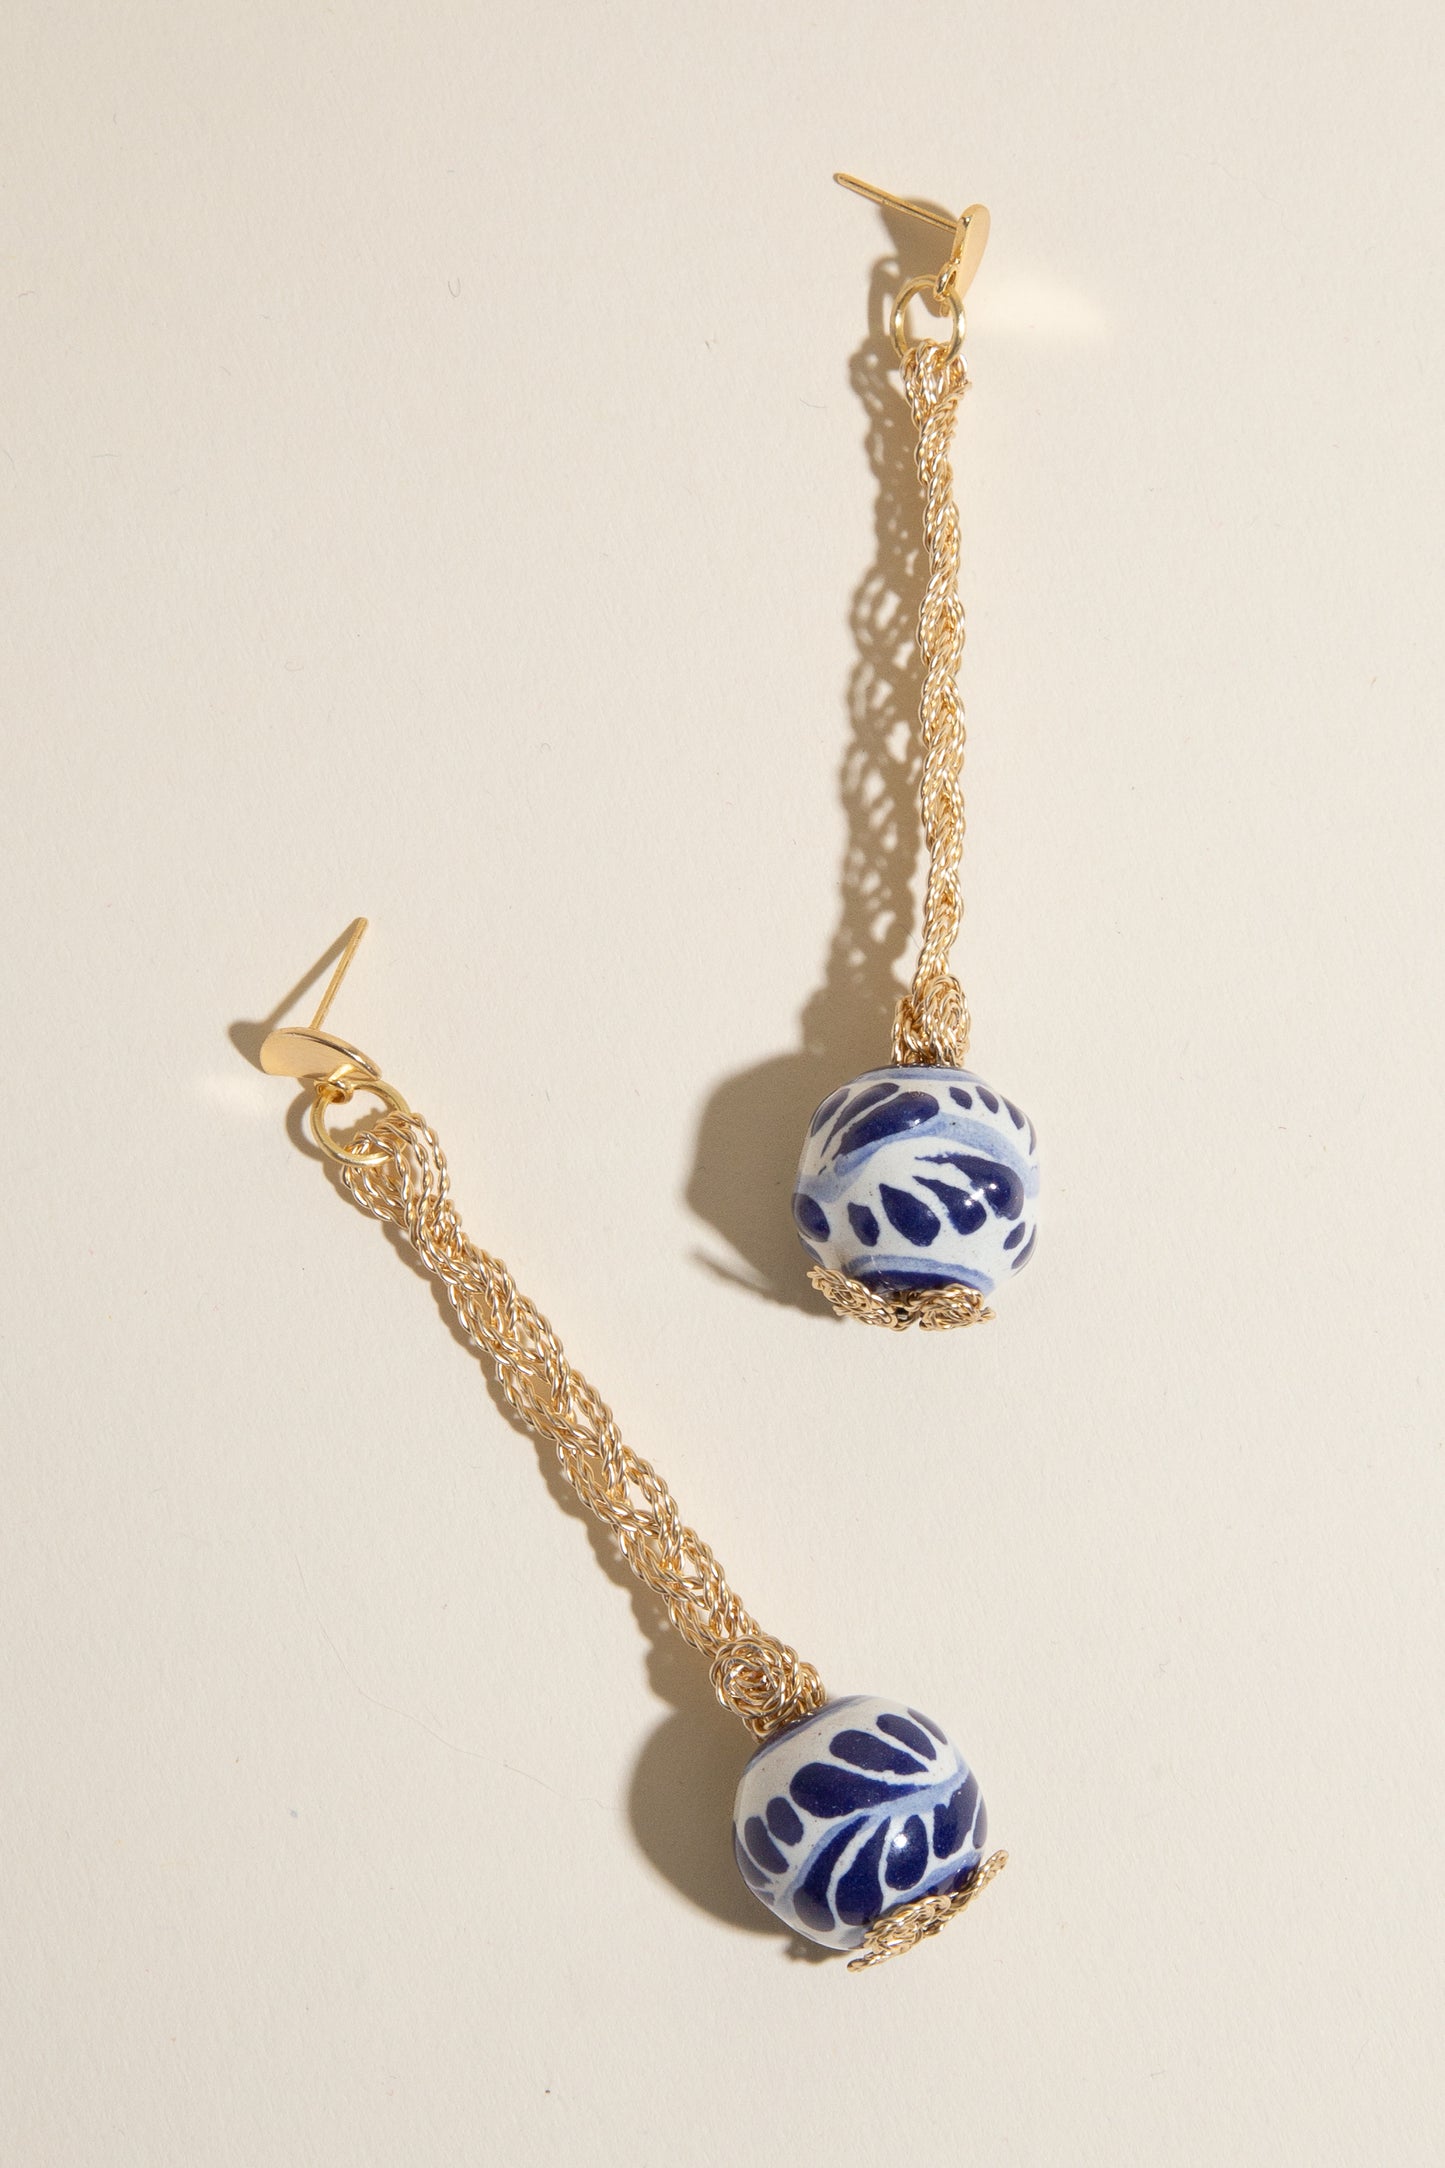 Load image into Gallery viewer, Talavera Drop Earring
